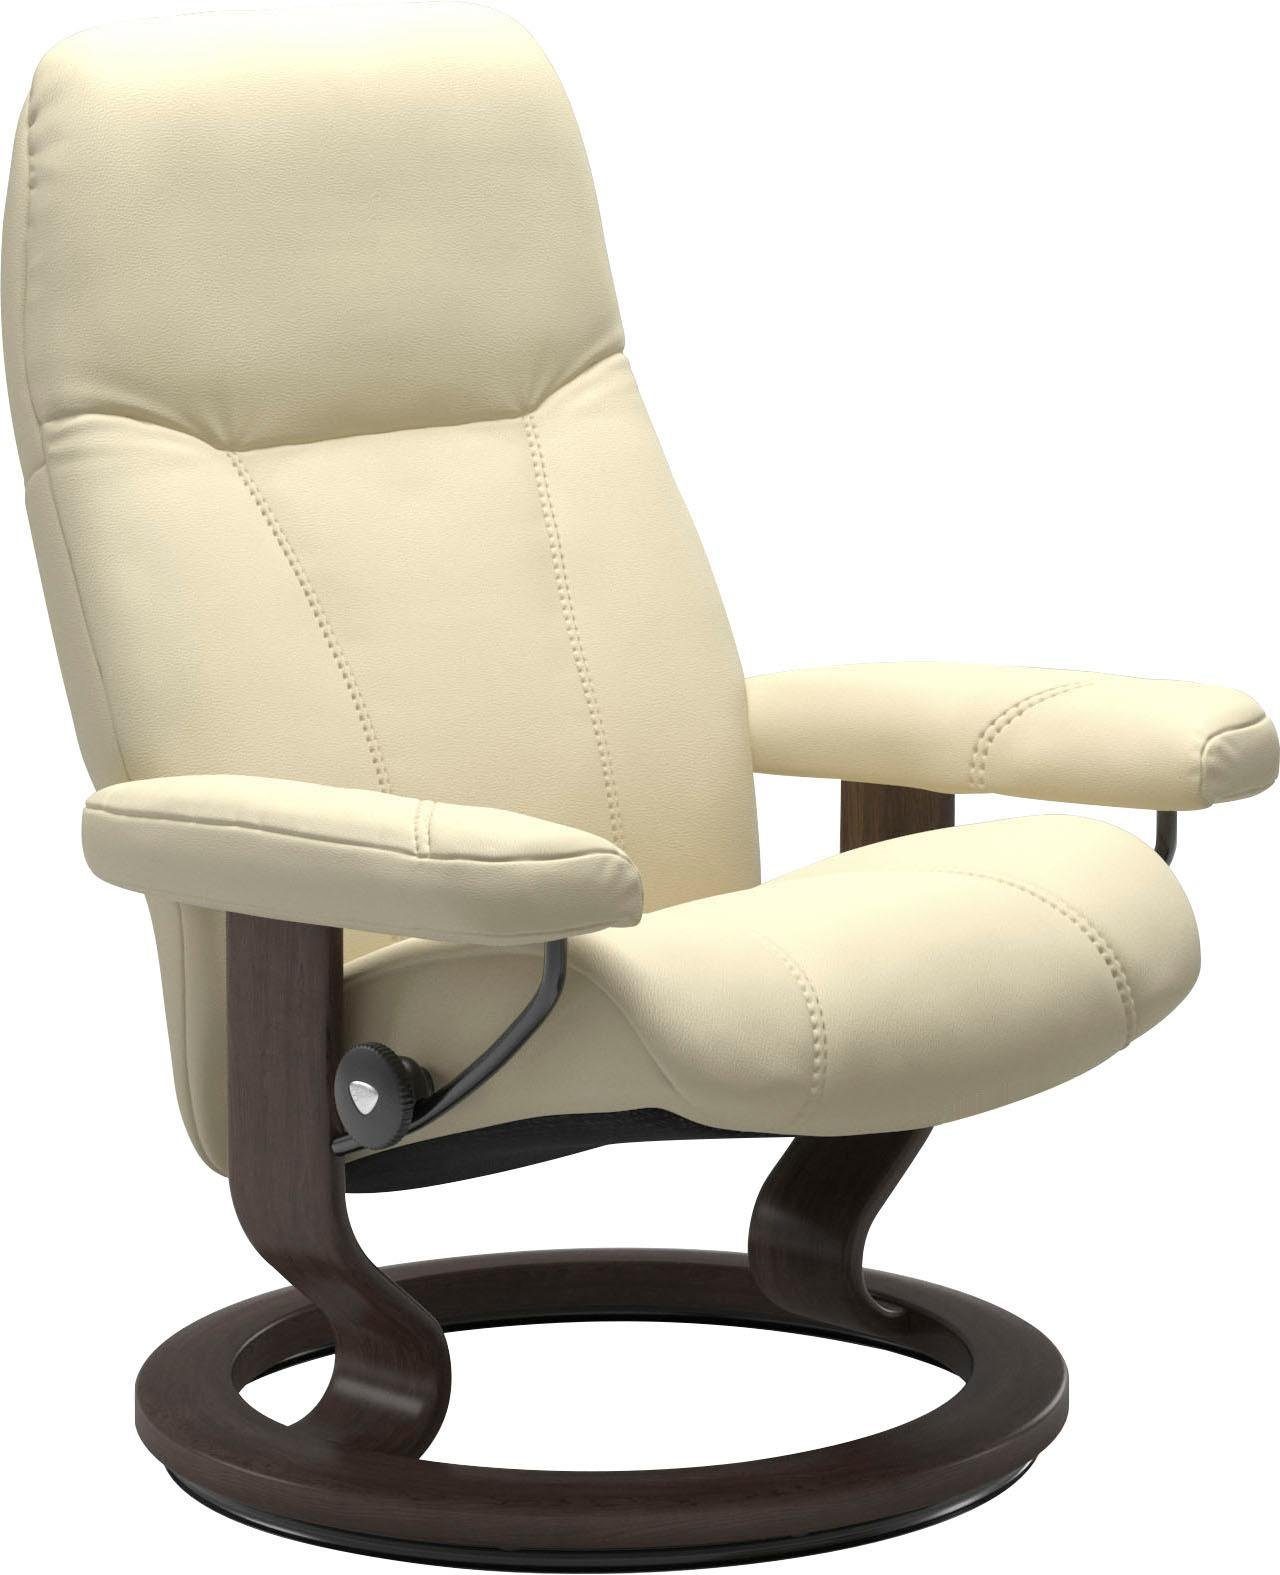 Relaxsessel Wenge Base, Gestell Consul, Größe Stressless® Classic S, mit